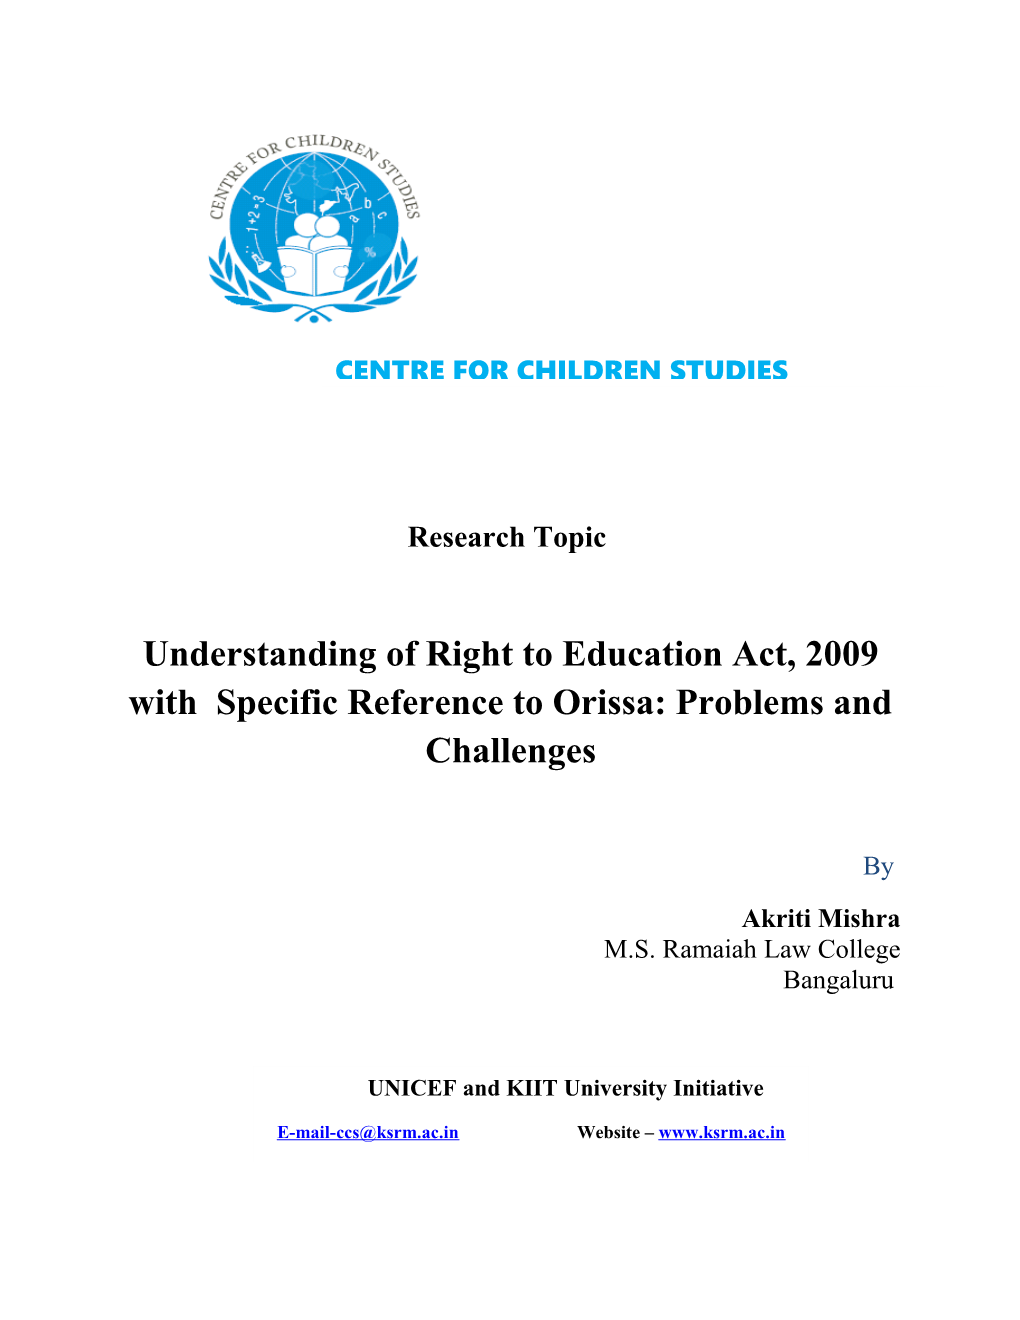 Understanding of Right to Education Act, 2009 with Specific Reference to Orissa: Problems